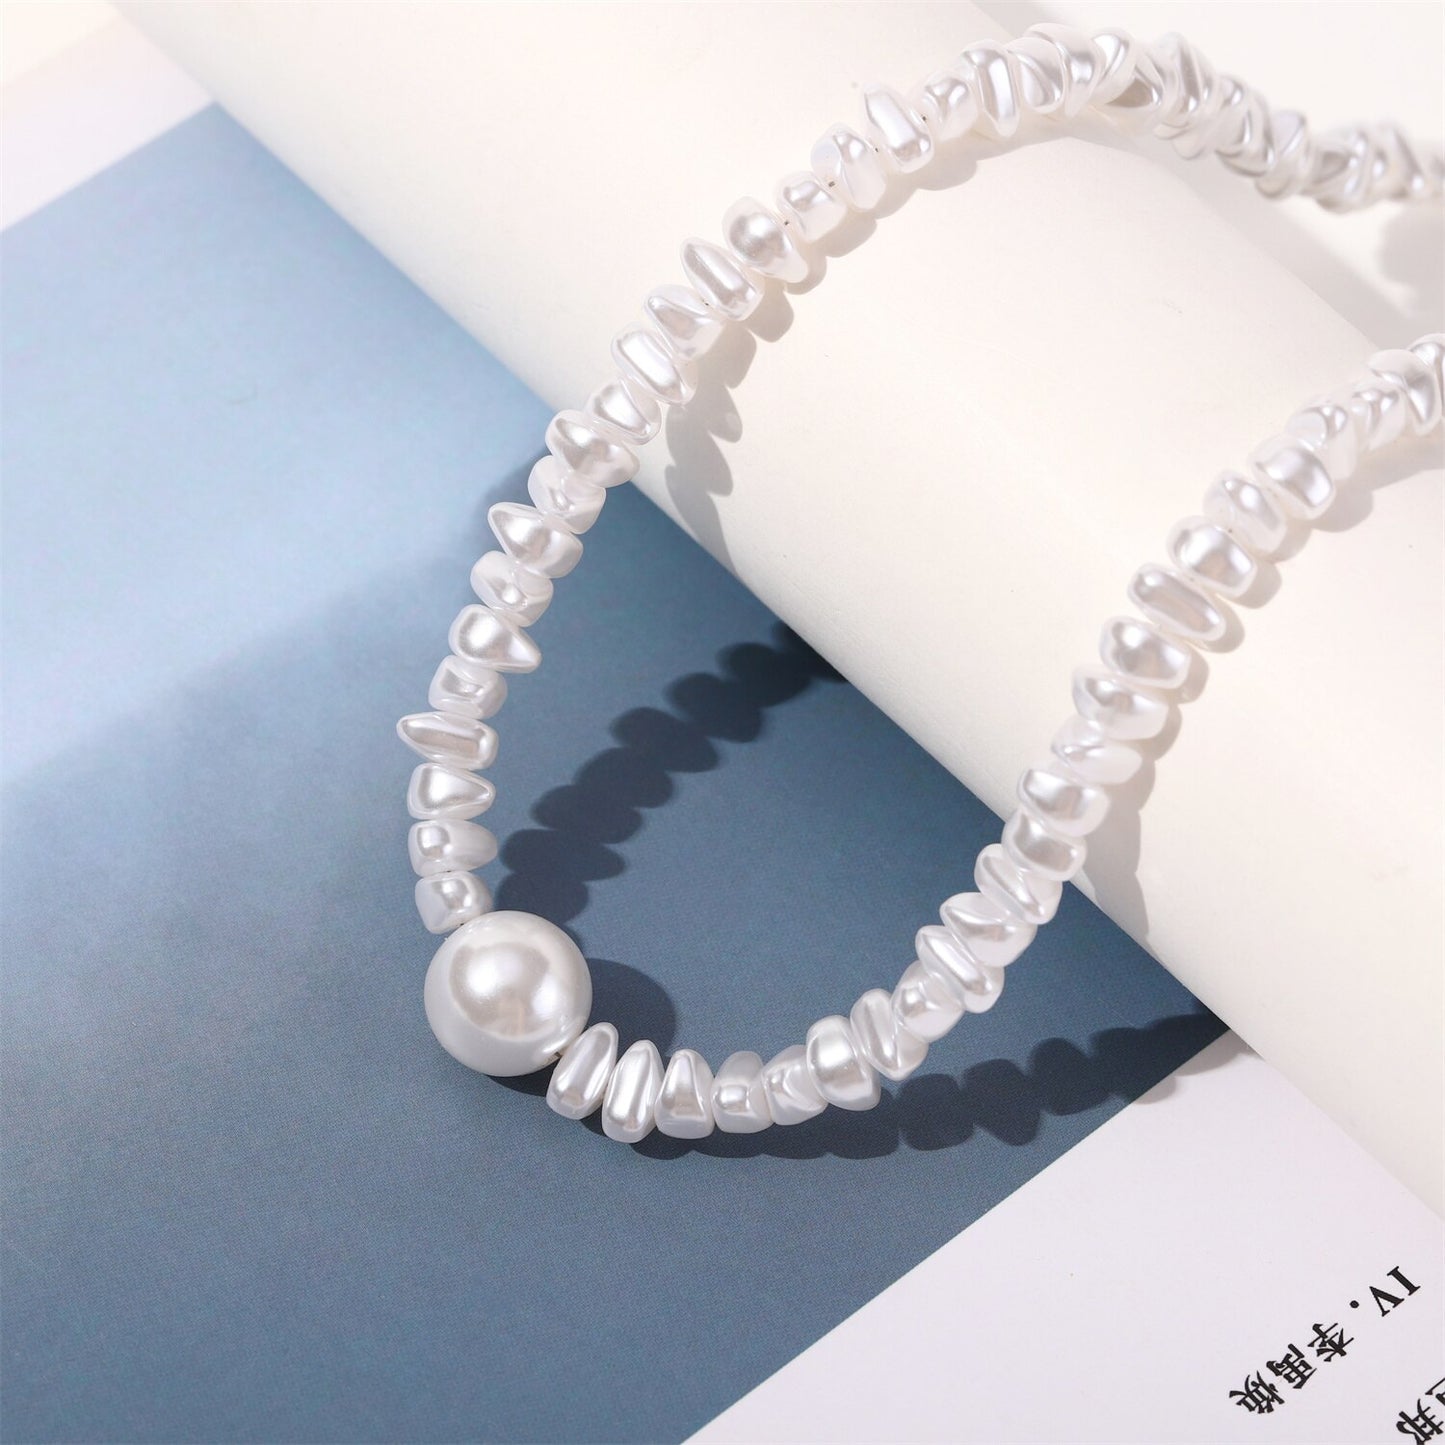 Vintage Pearl Necklaces for Women Fashion Big Pearl Chain Necklace New Personality Statement Jewelry Choker Collar Gifts